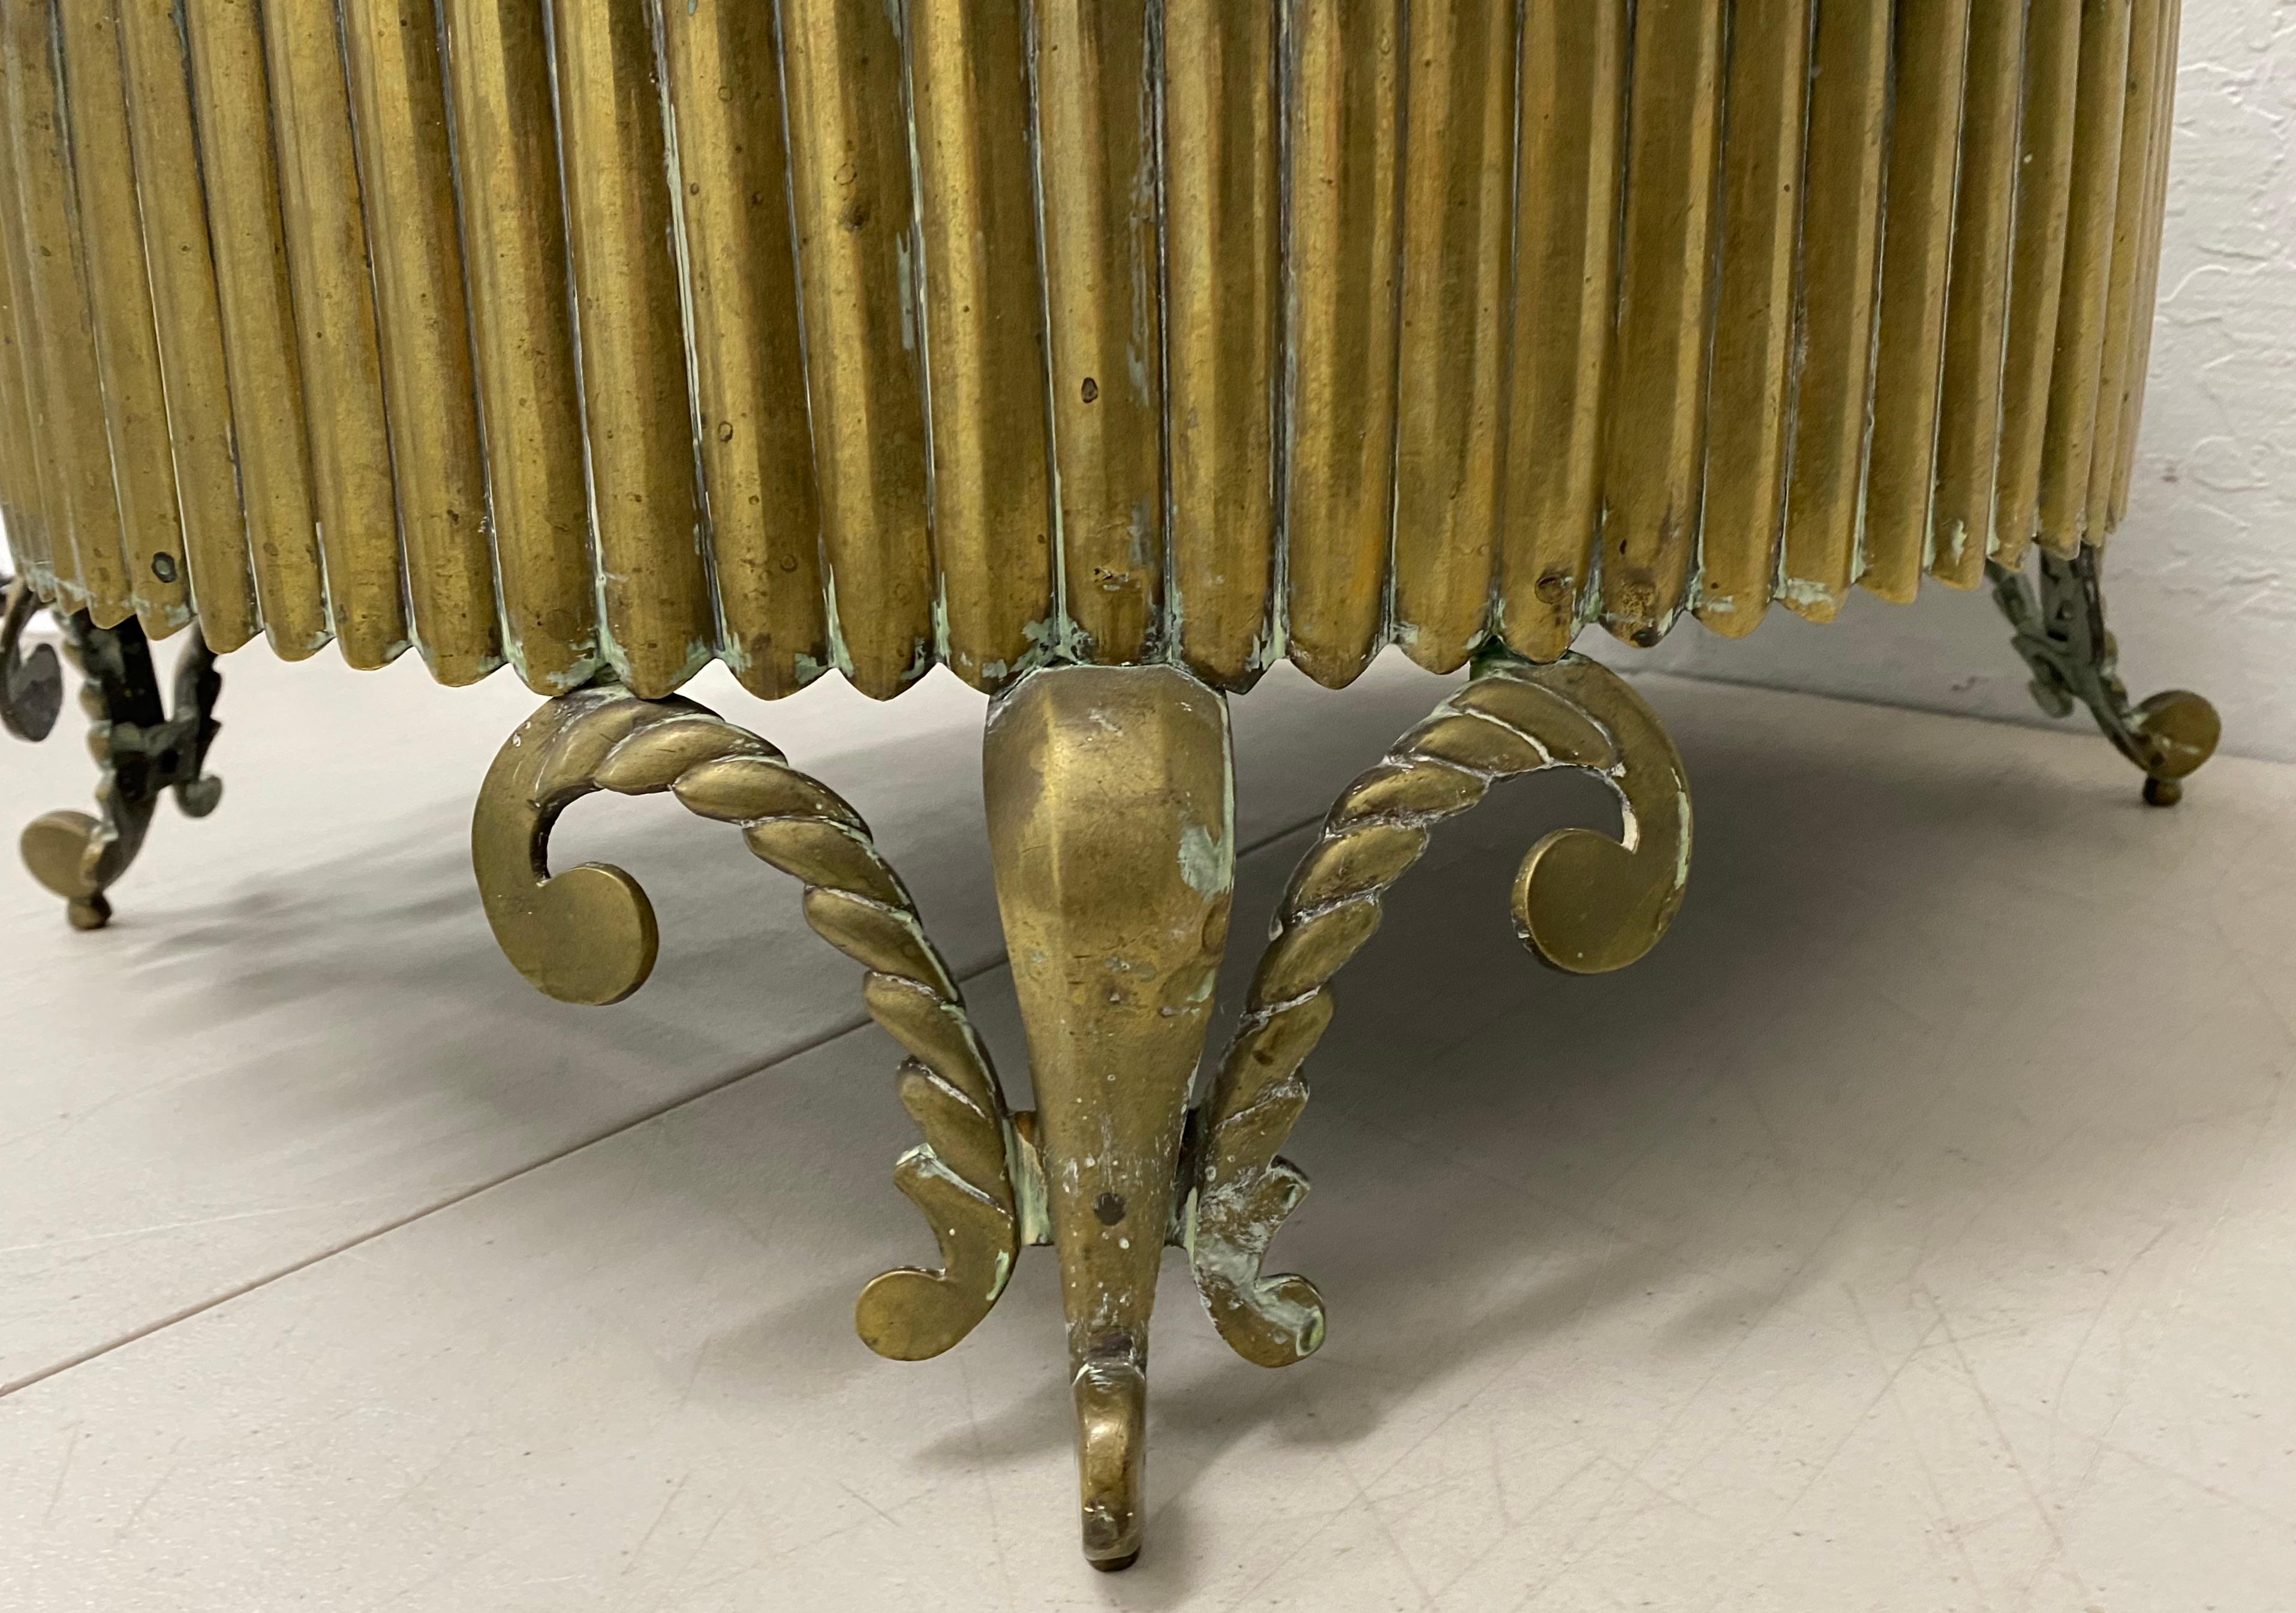 19th century brass brazier with skewers

Measures: 22